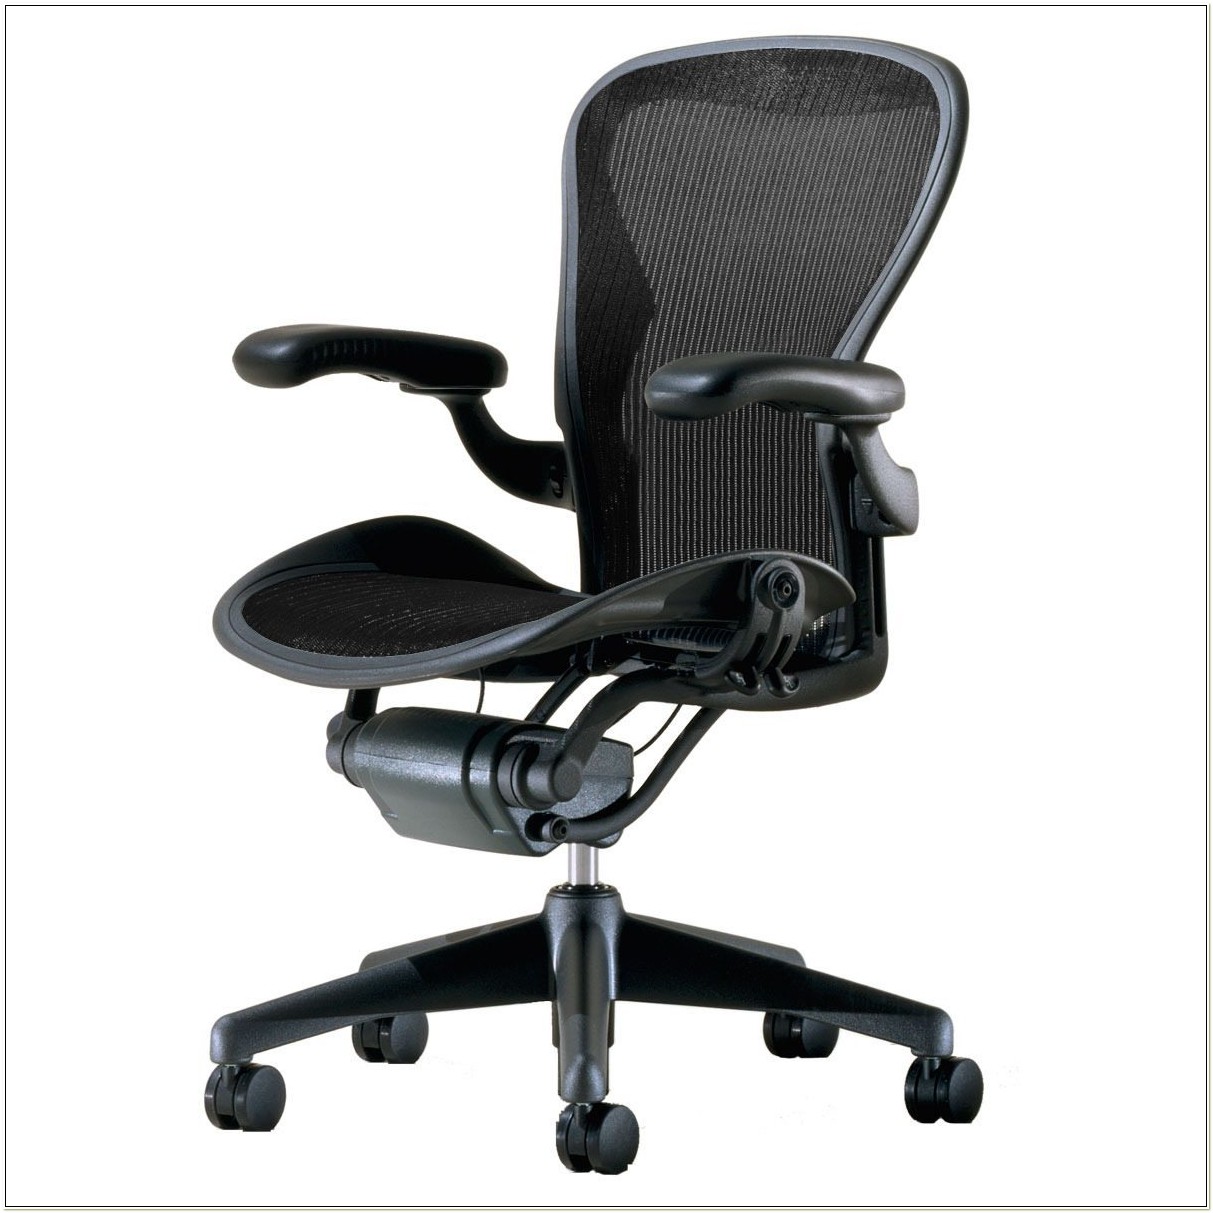 Top Rated Office Chairs - Chairs : Home Decorating Ideas #ne2enrkQV3